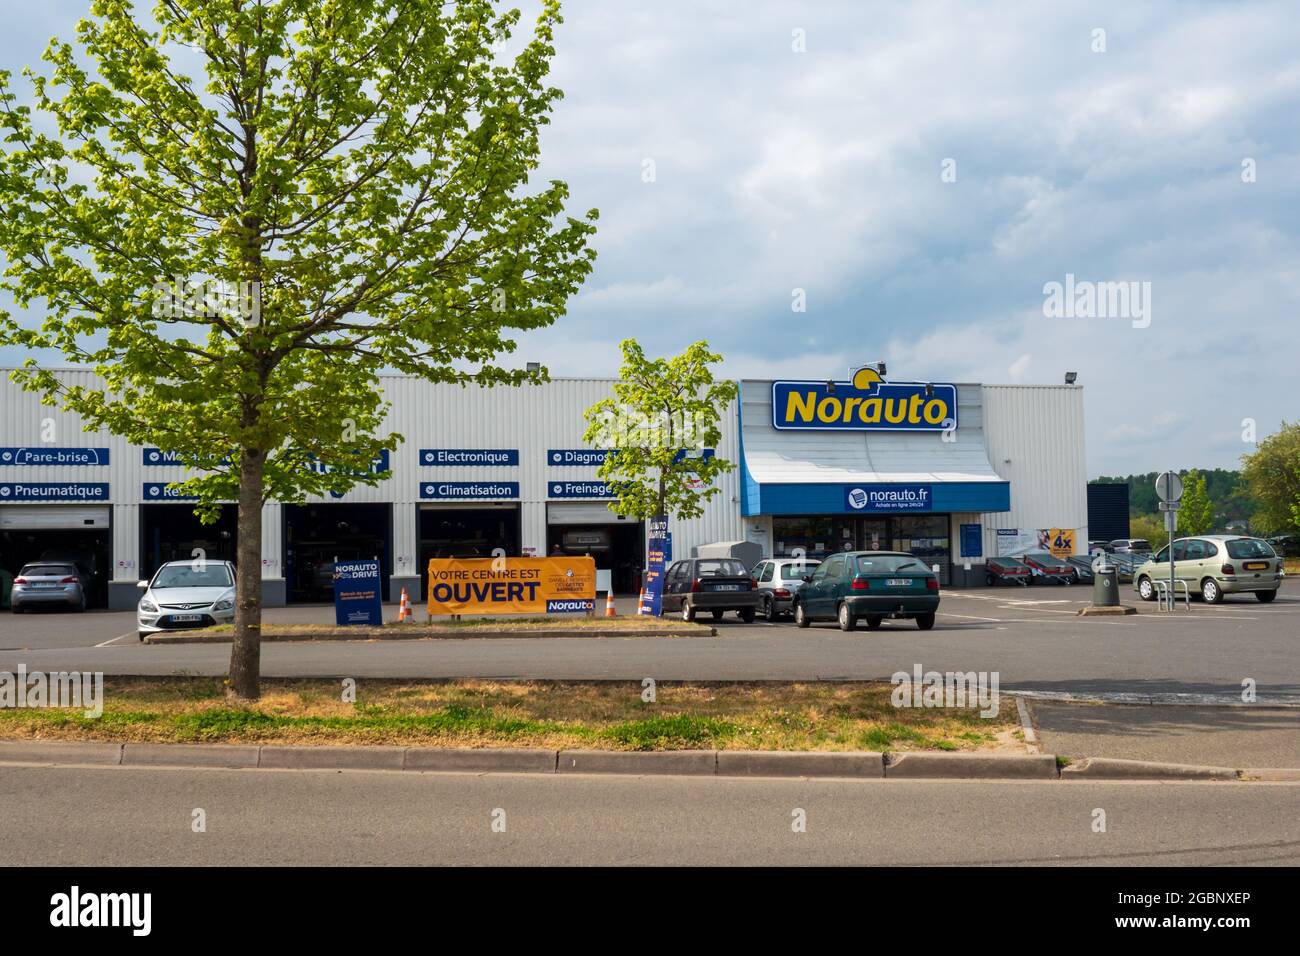 LA FLECHE, FRANCE - Jul 21, 2021: A NORAUTO Front Store Facade of Shop with Logo Signage in Fleche, France  is a brand for repair hardware and product Stock Photo